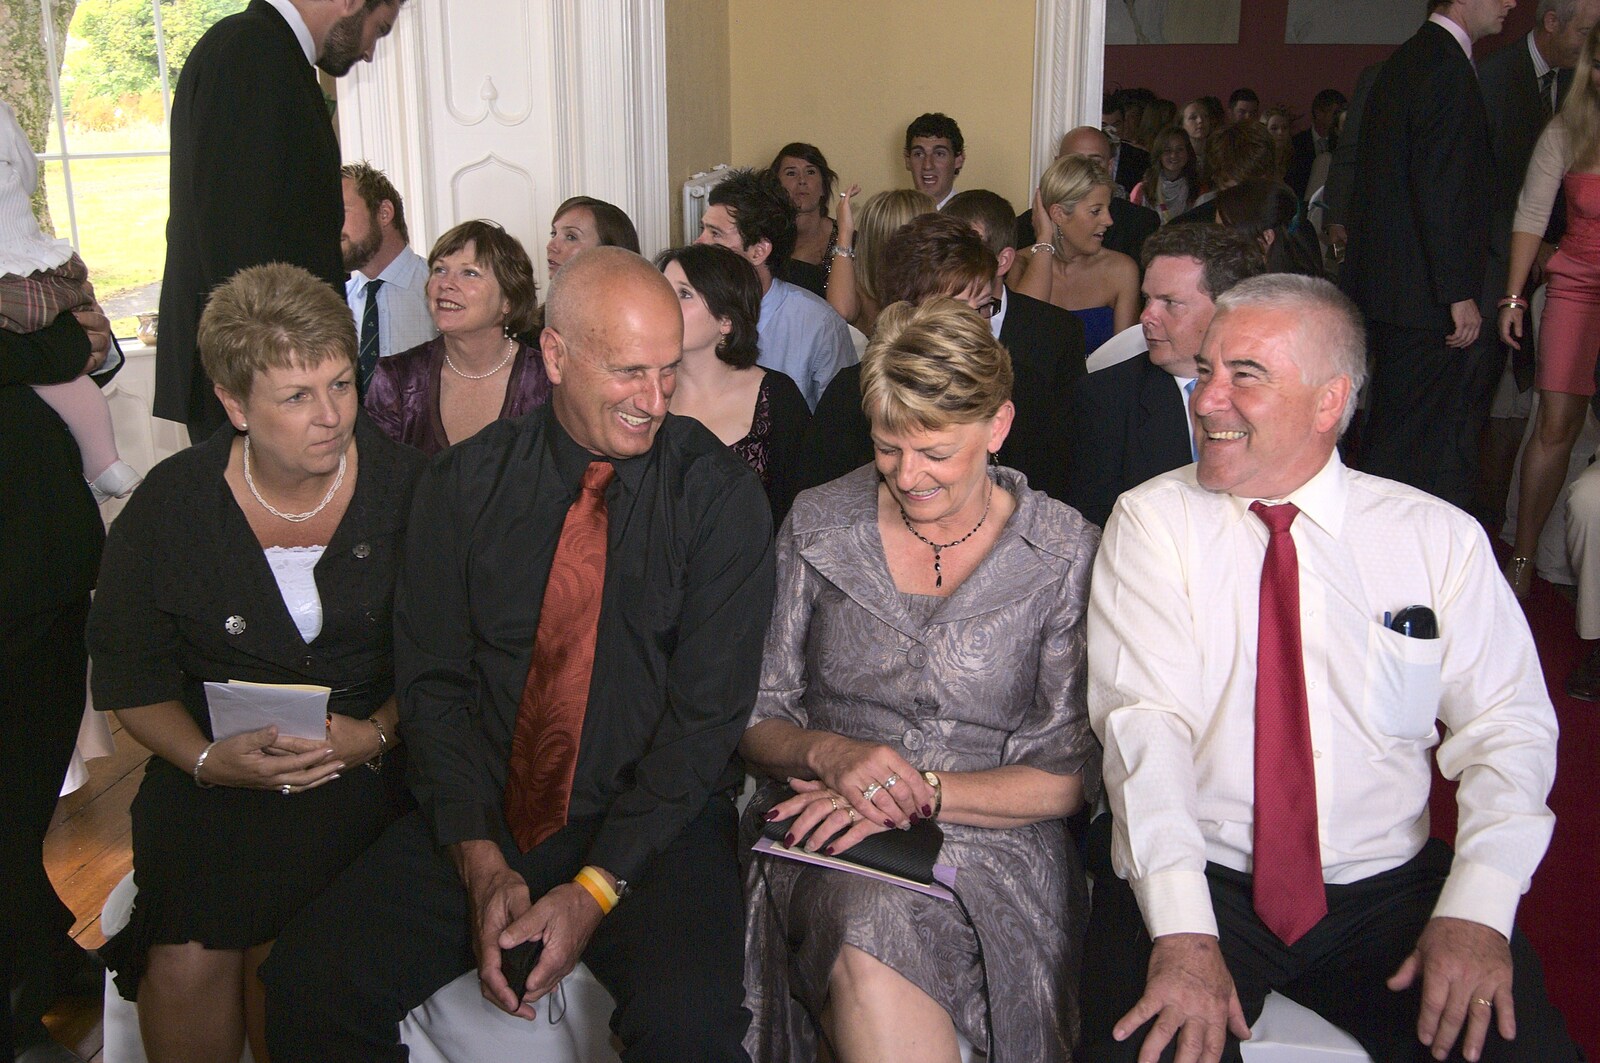 A packed room from Julie and Cameron's Wedding, Ballintaggart House, Dingle - 24th July 2009